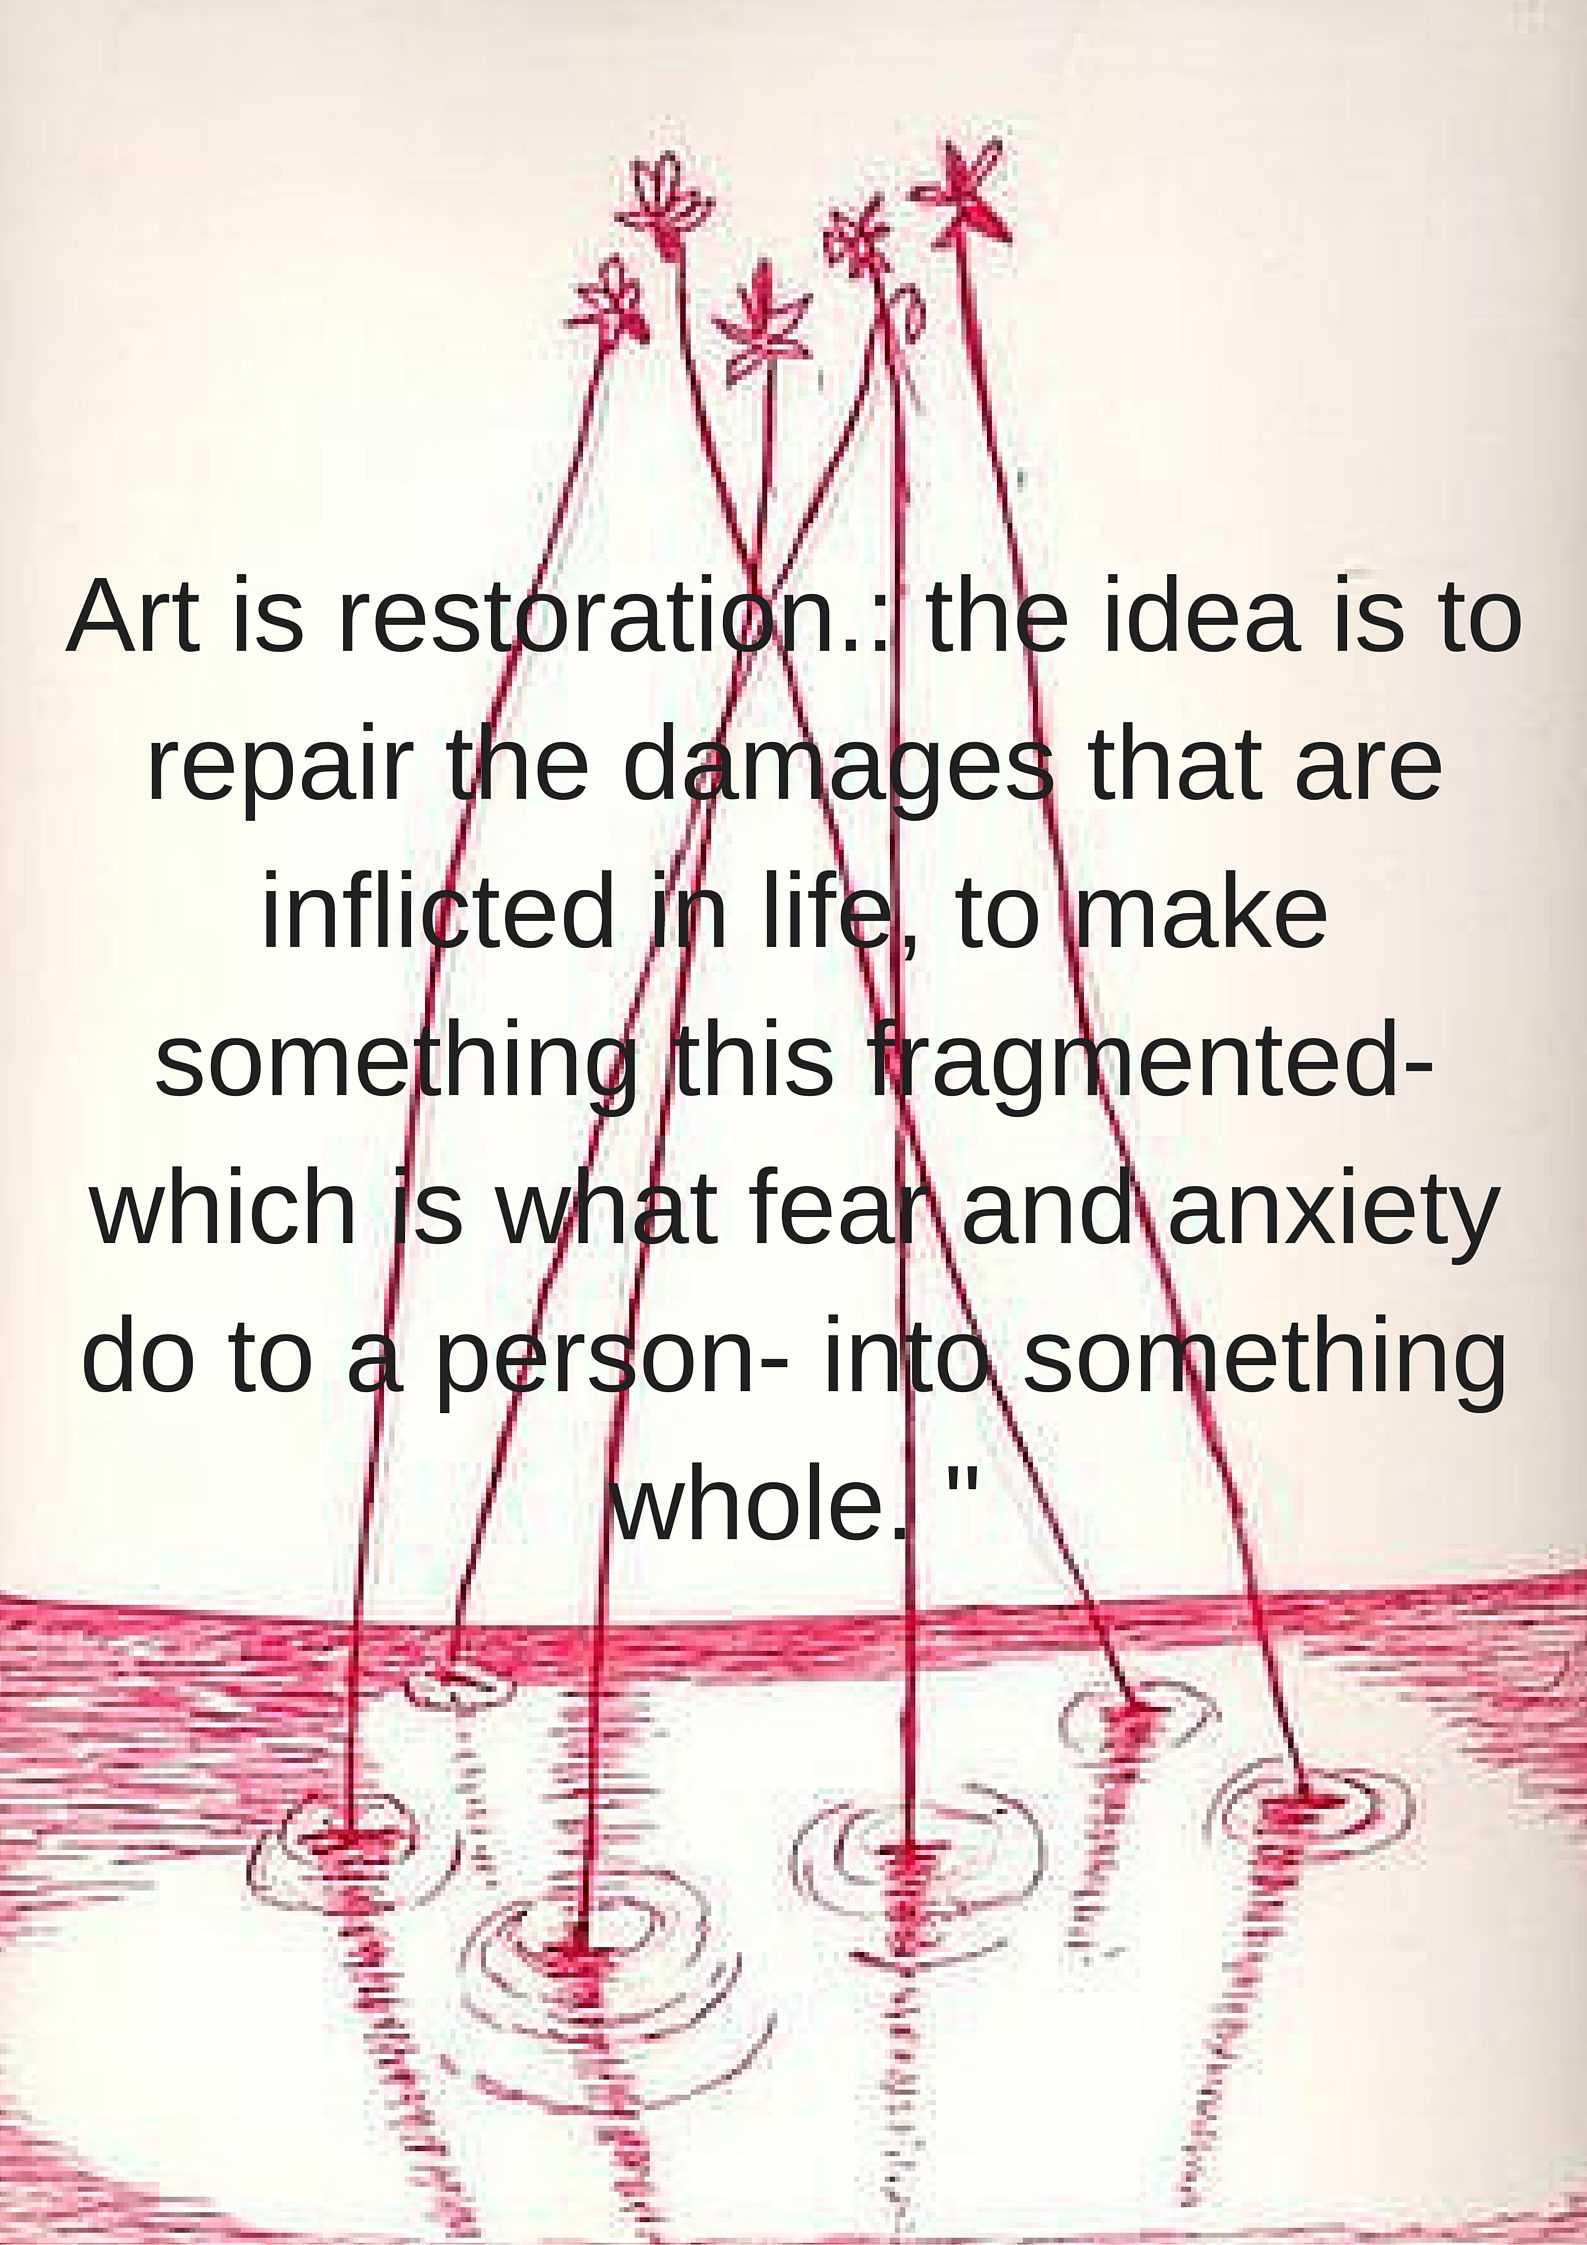 Art is restoration.- the idea is to repair the damages that are inflicted in life, to make something this fragmented- which is what fear and anxiety do to a person- into something whole. -